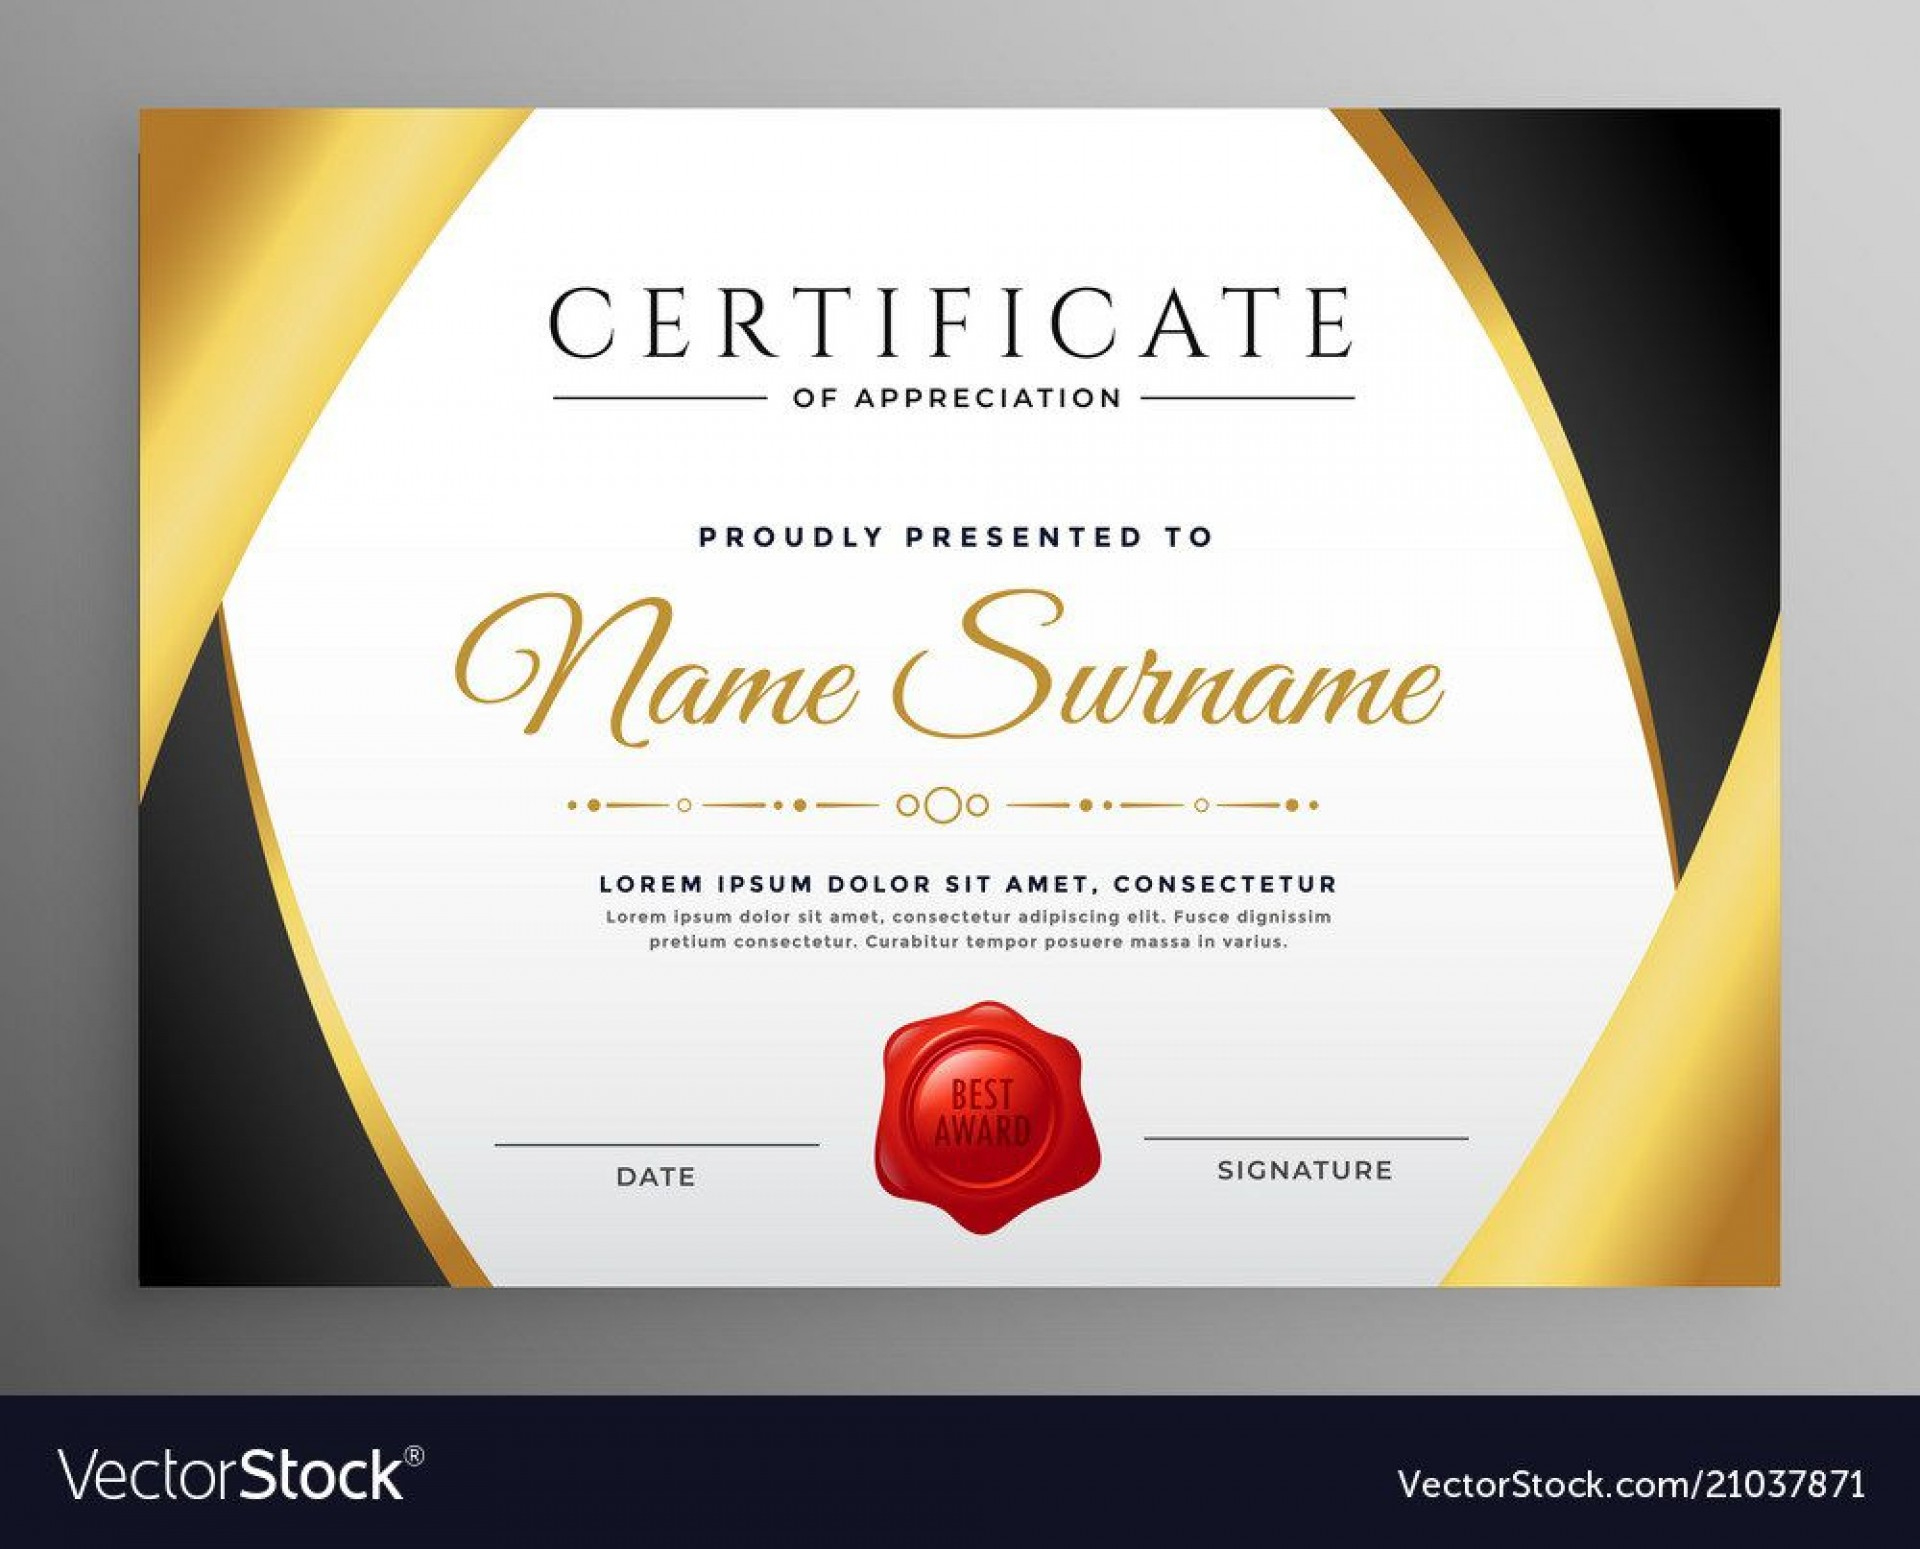 Certificate Of Appreciation Template ~ Addictionary Intended For Free Editable Certificate Of Appreciation Templates